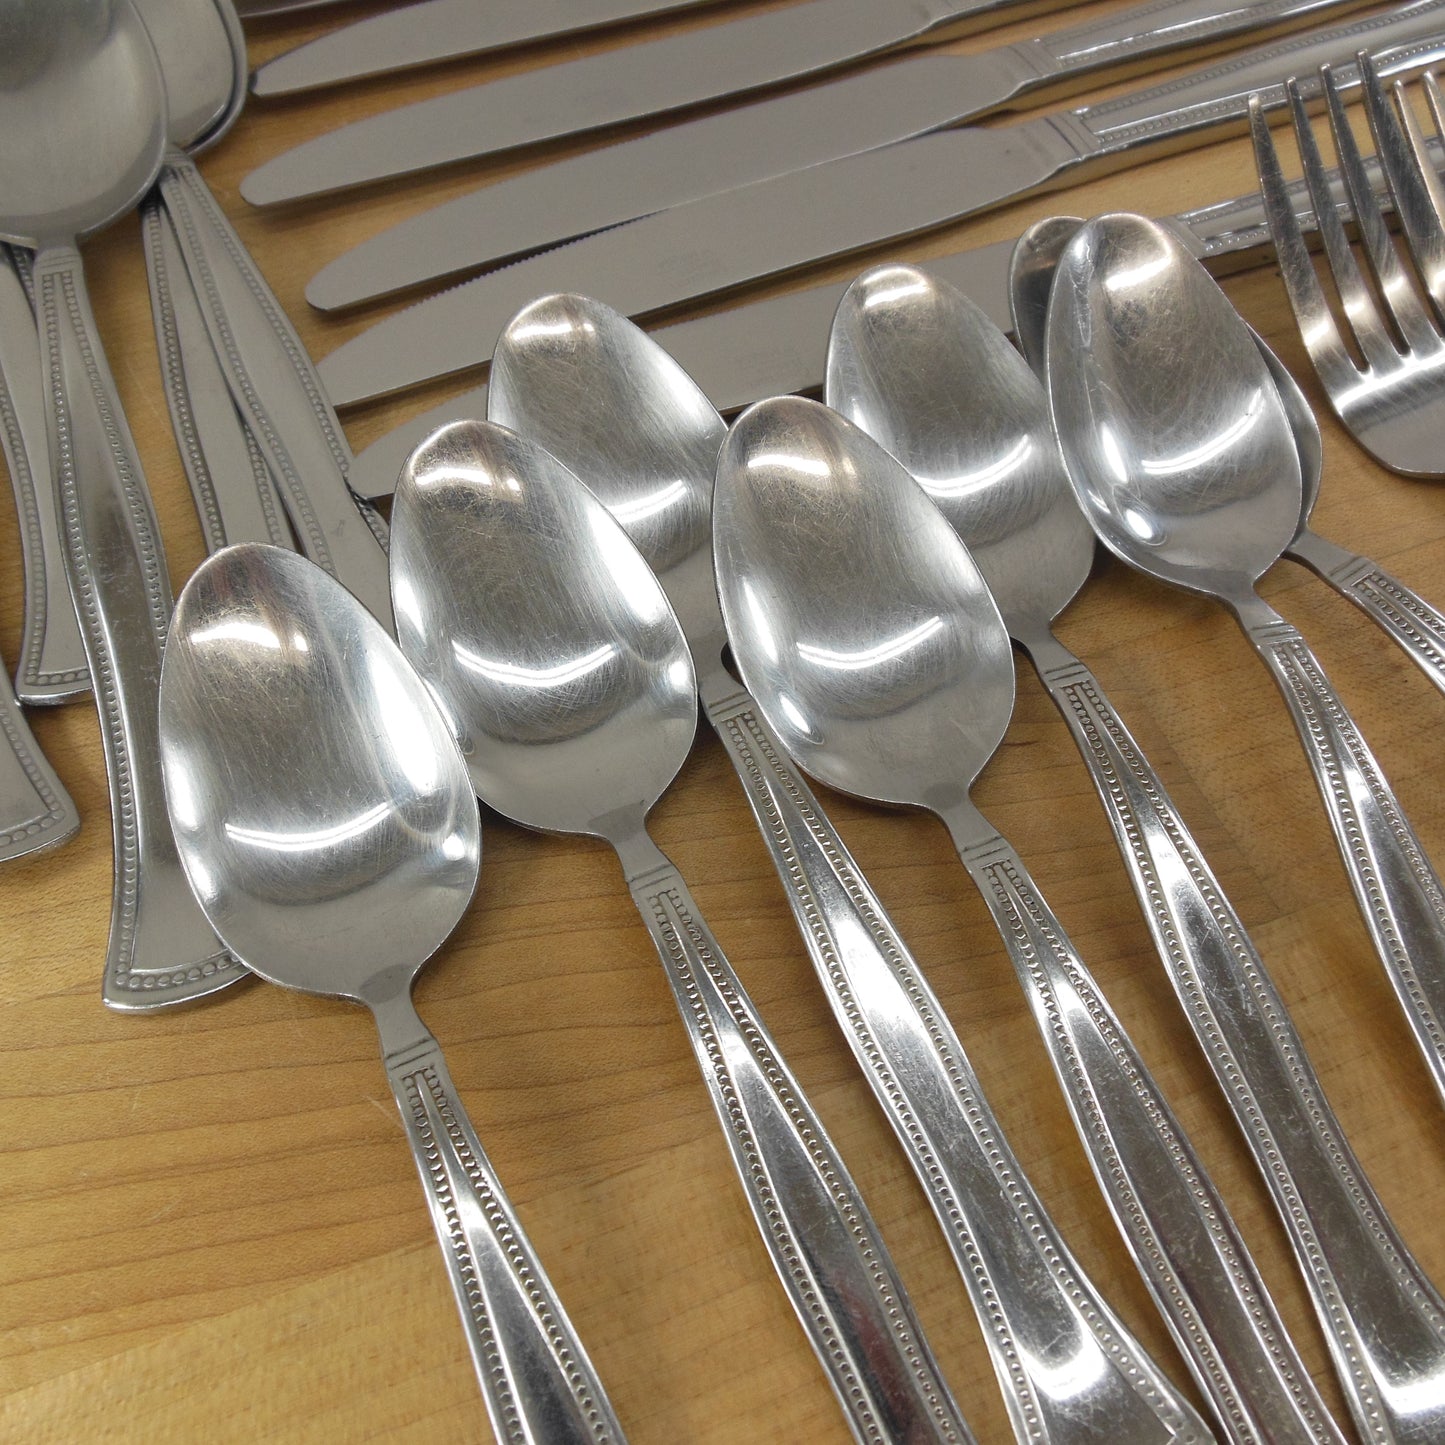 Mikasa Chadwick Bead Stainless Flatware Partial Set - 33 Pieces Spoons Forks Knives